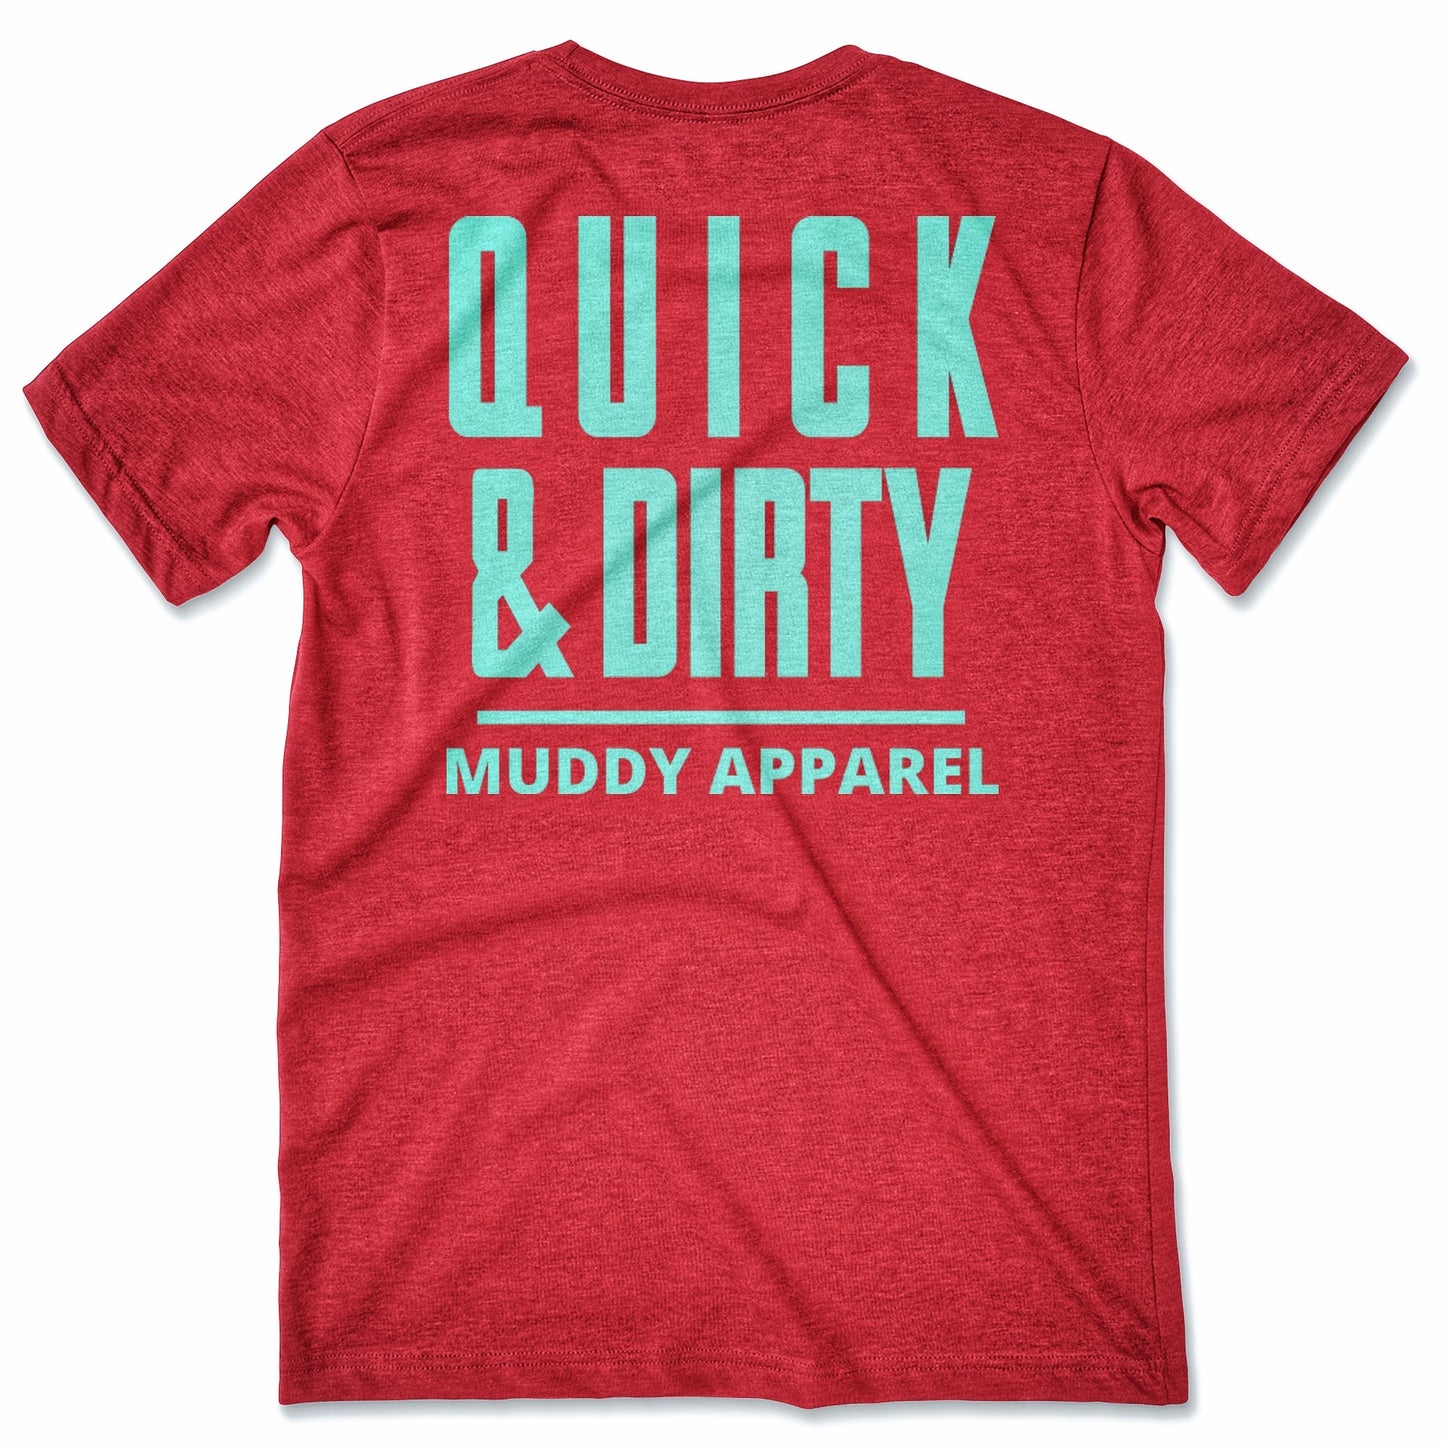 NEW!!! QUICK & DIRTY - HEATHER RED W/ MINT PREMIUM TEE